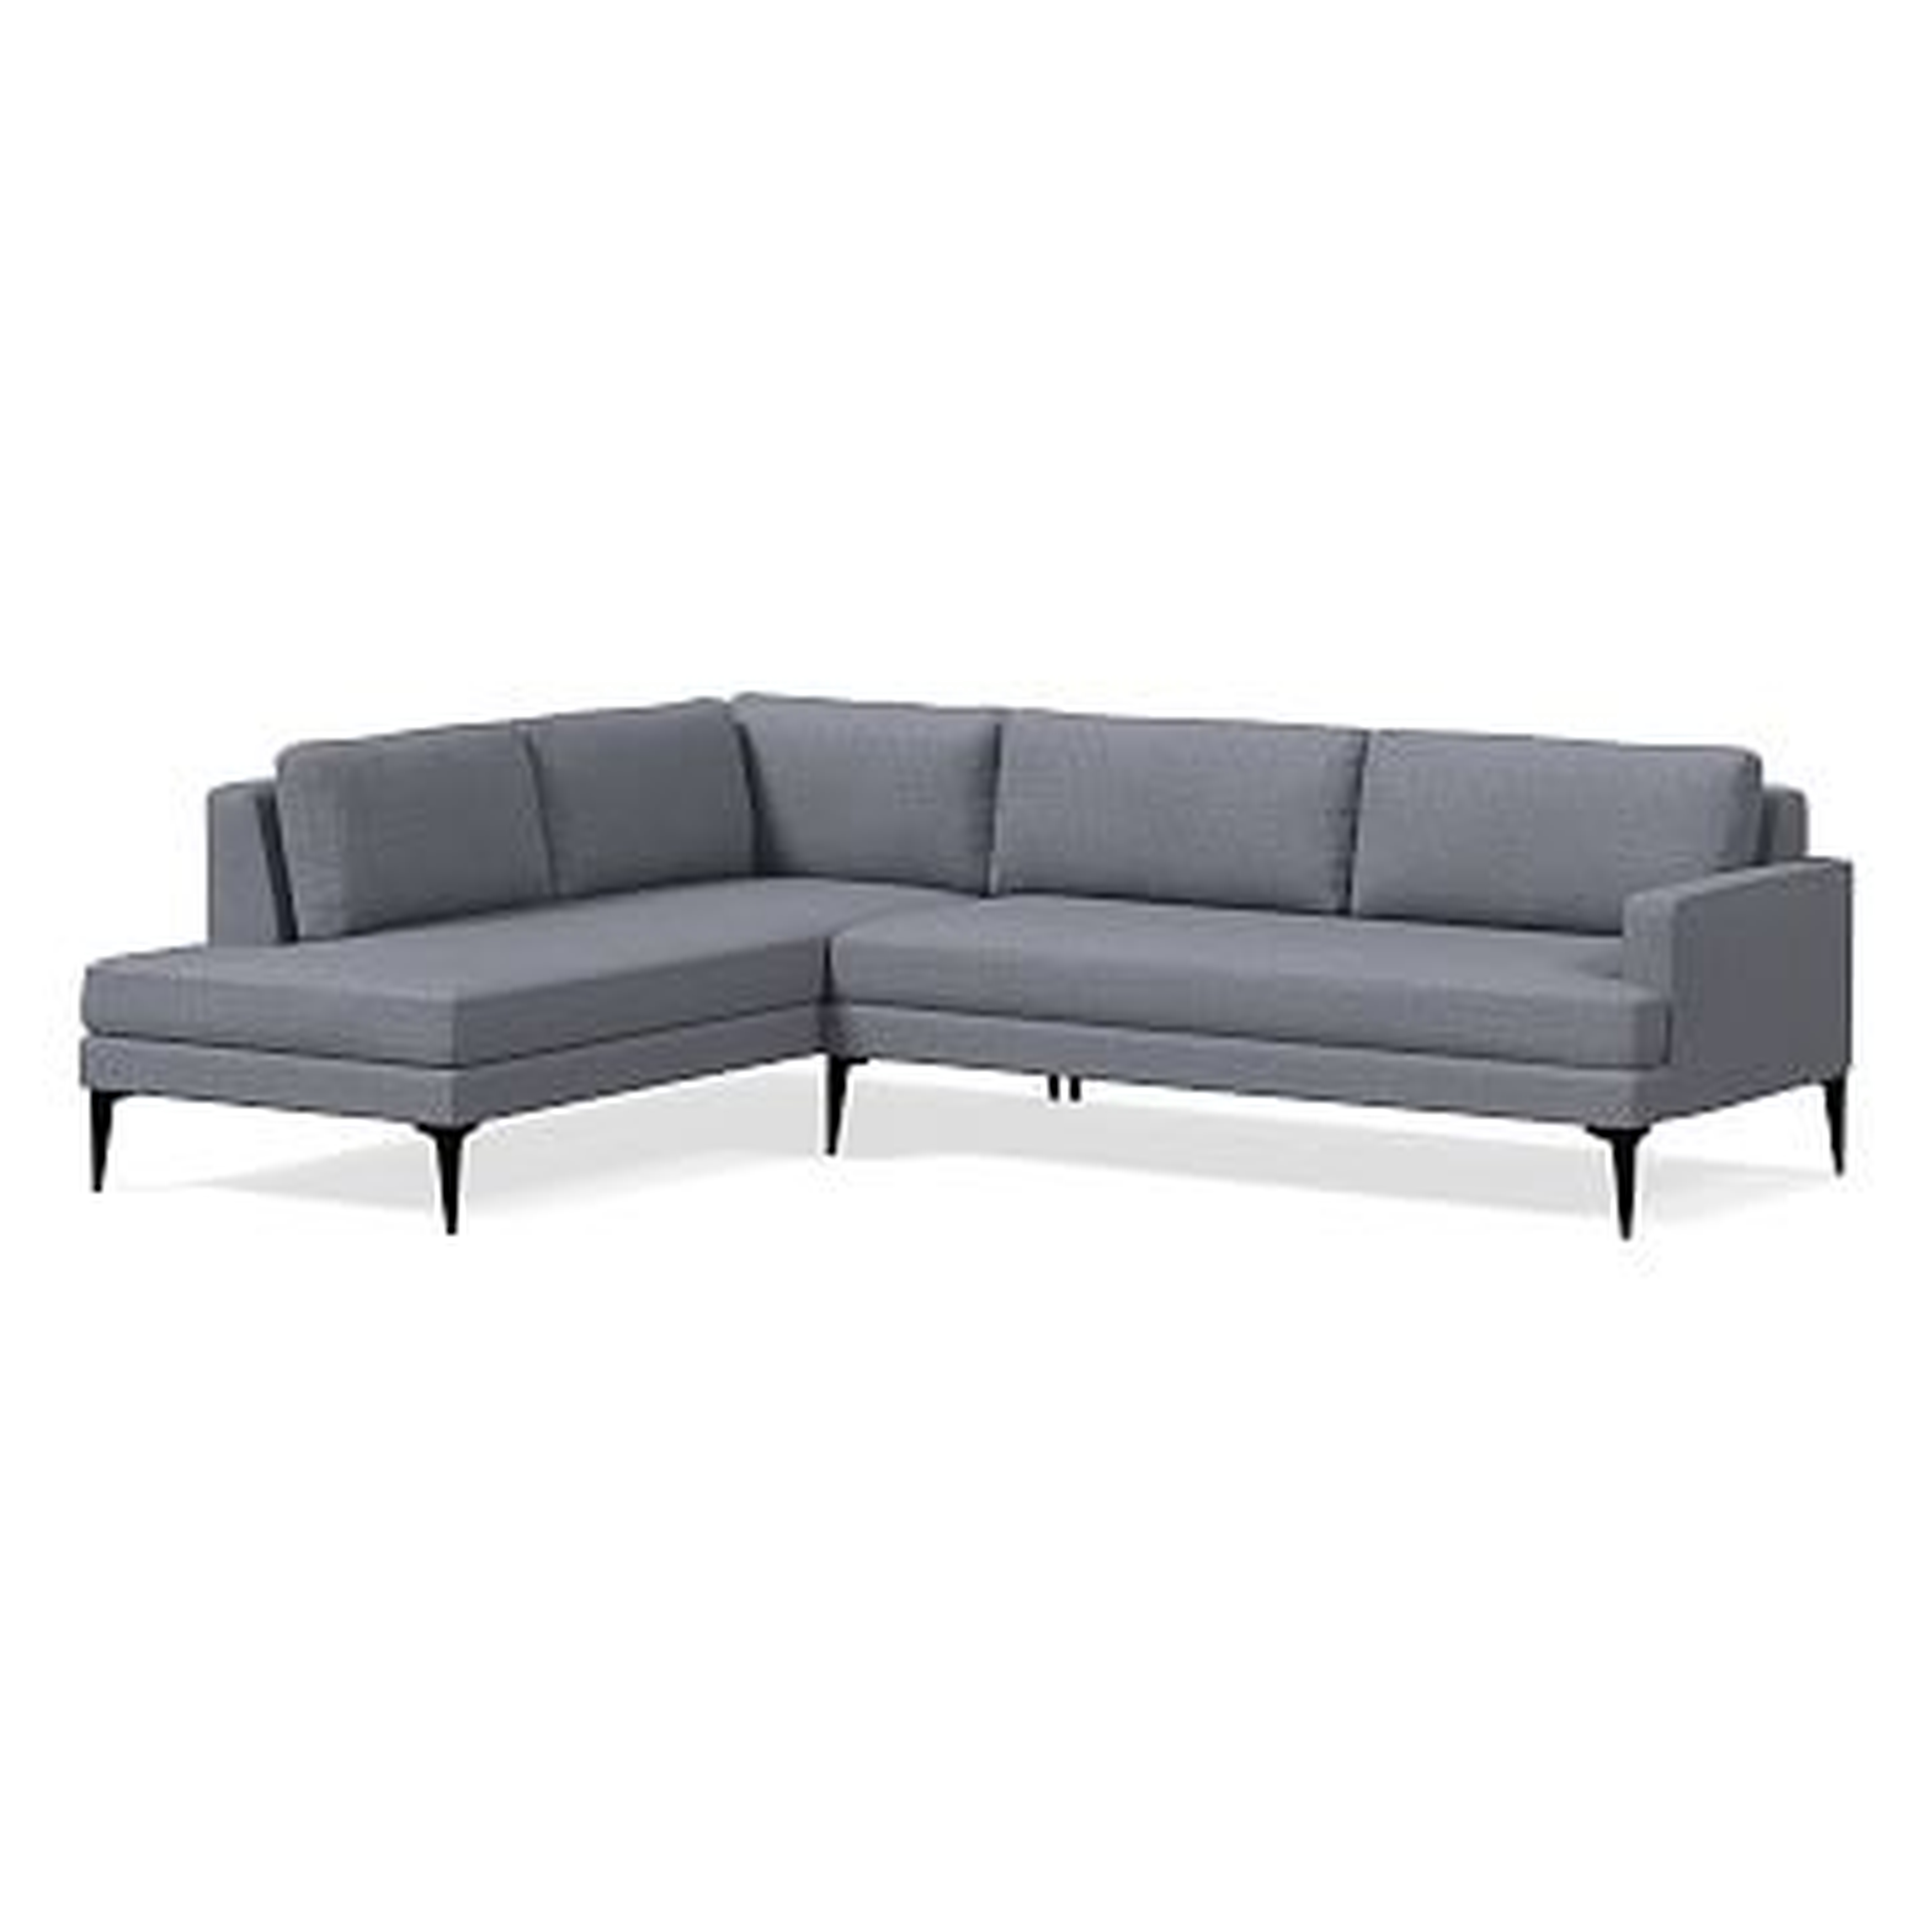 Andes Petite Sectional Set 54: Right Arm 2.5 Seater Sofa, Left Arm Terminal Chaise, Poly, Yarn Dyed Linen Weave, Graphite, Dark Pewter - West Elm